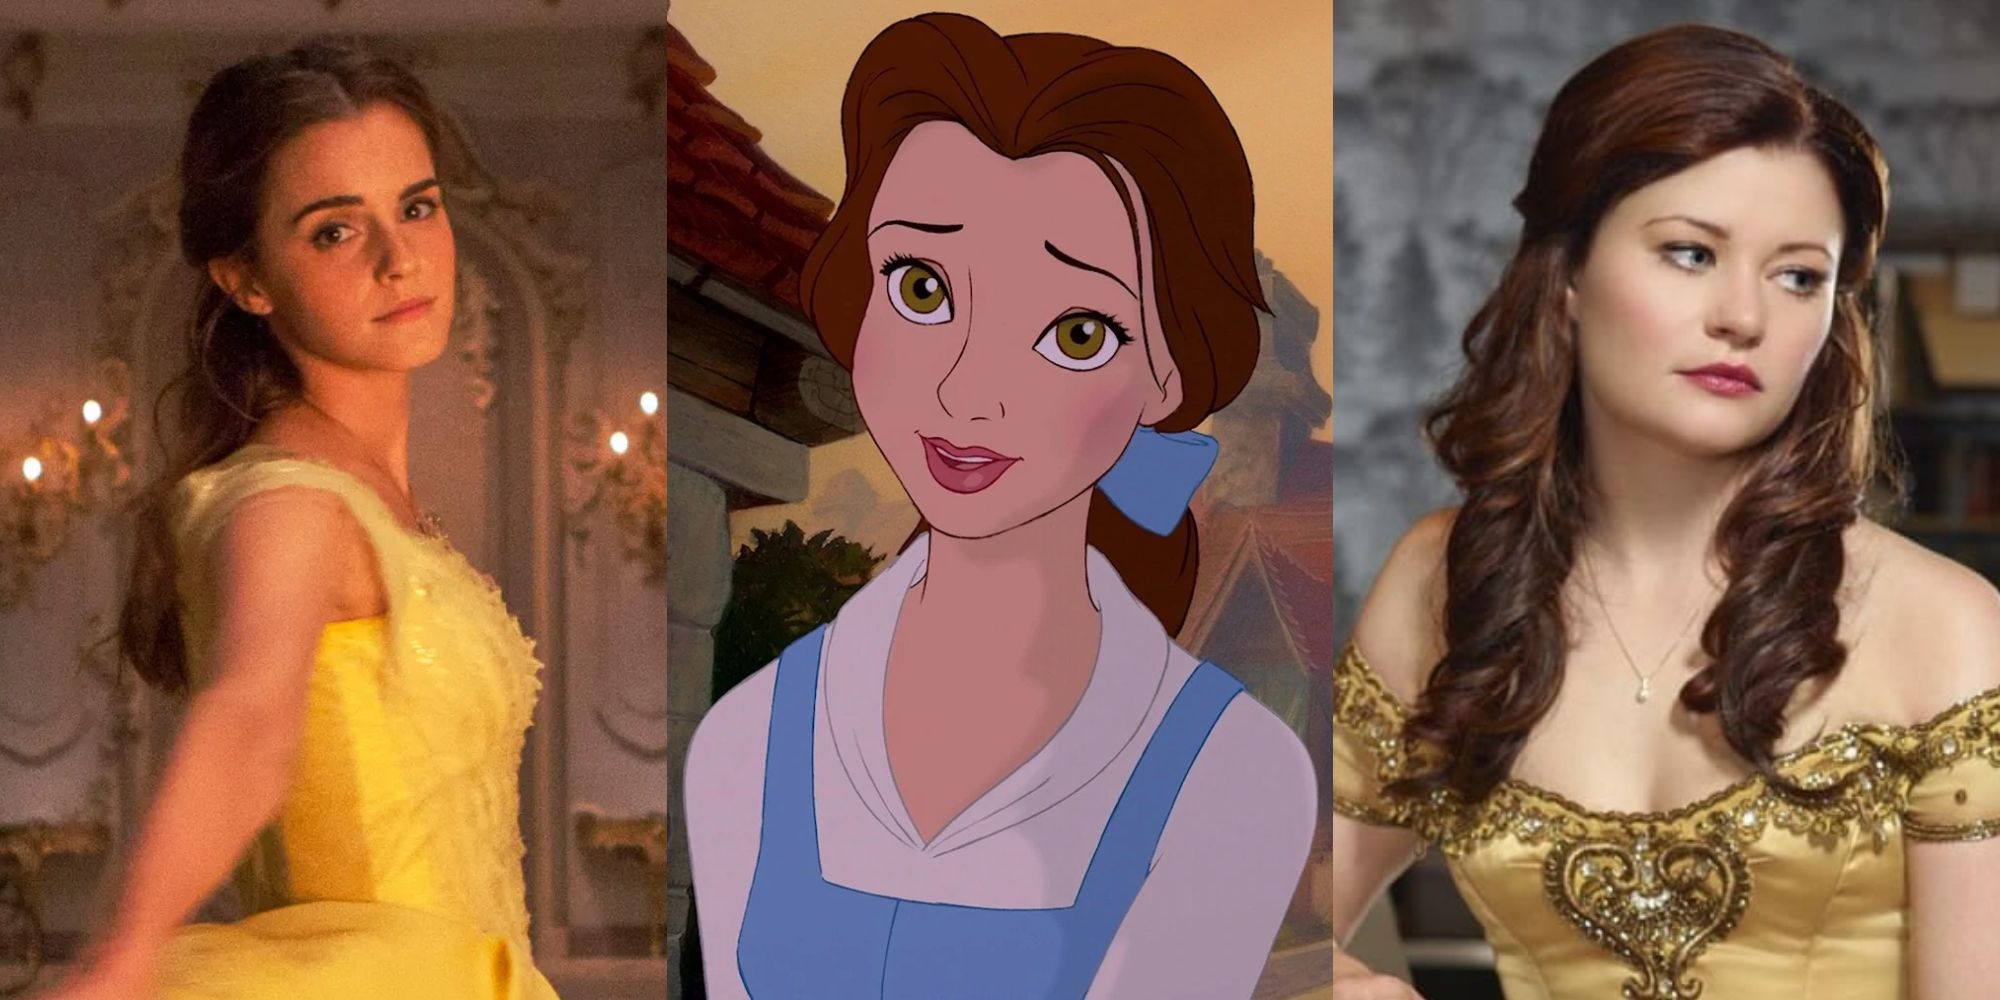 Emma Watson, Paige O'Hara, and Emilie de Ravin as Belle from Beauty and the Beast